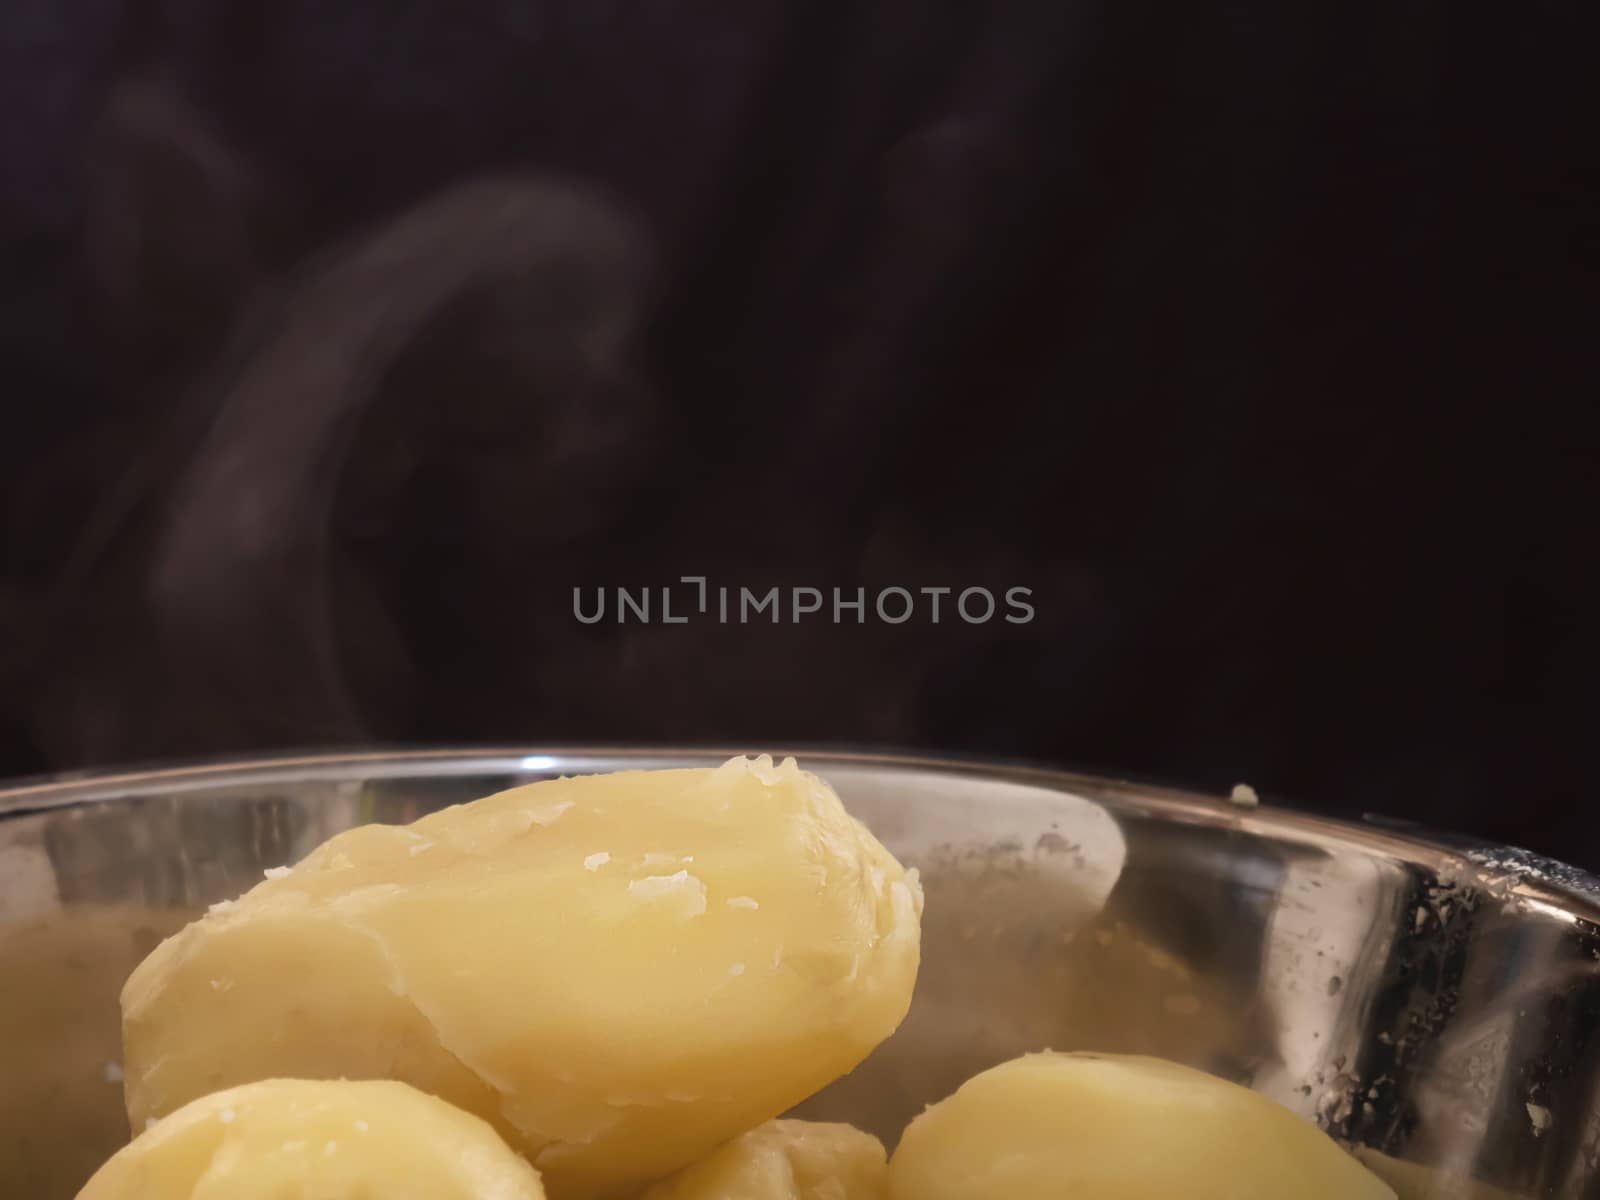 Boiled potato prepare to making food - potato cooking background concept by pairhandmade